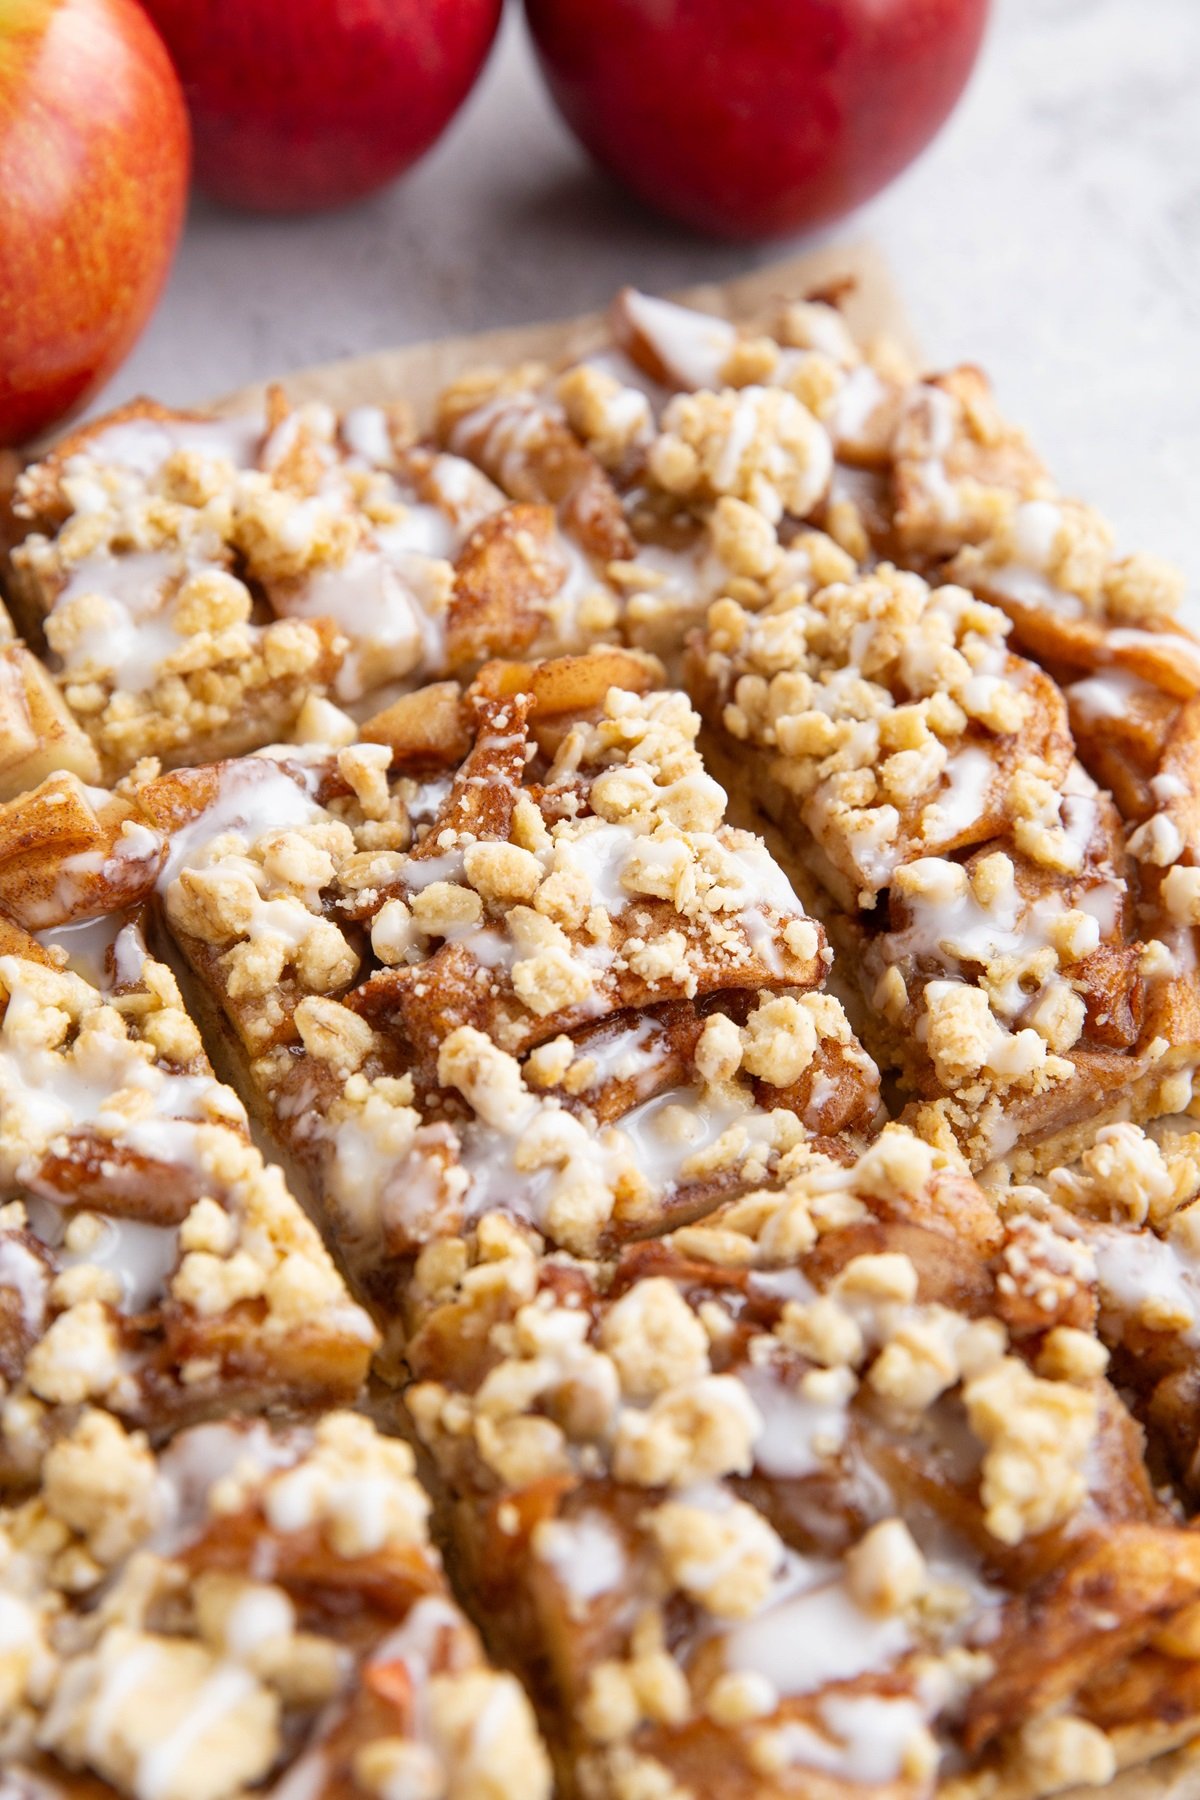 Apple crumb bars on a sheet of parchment paper, cut into slices. Fresh apples in the background.